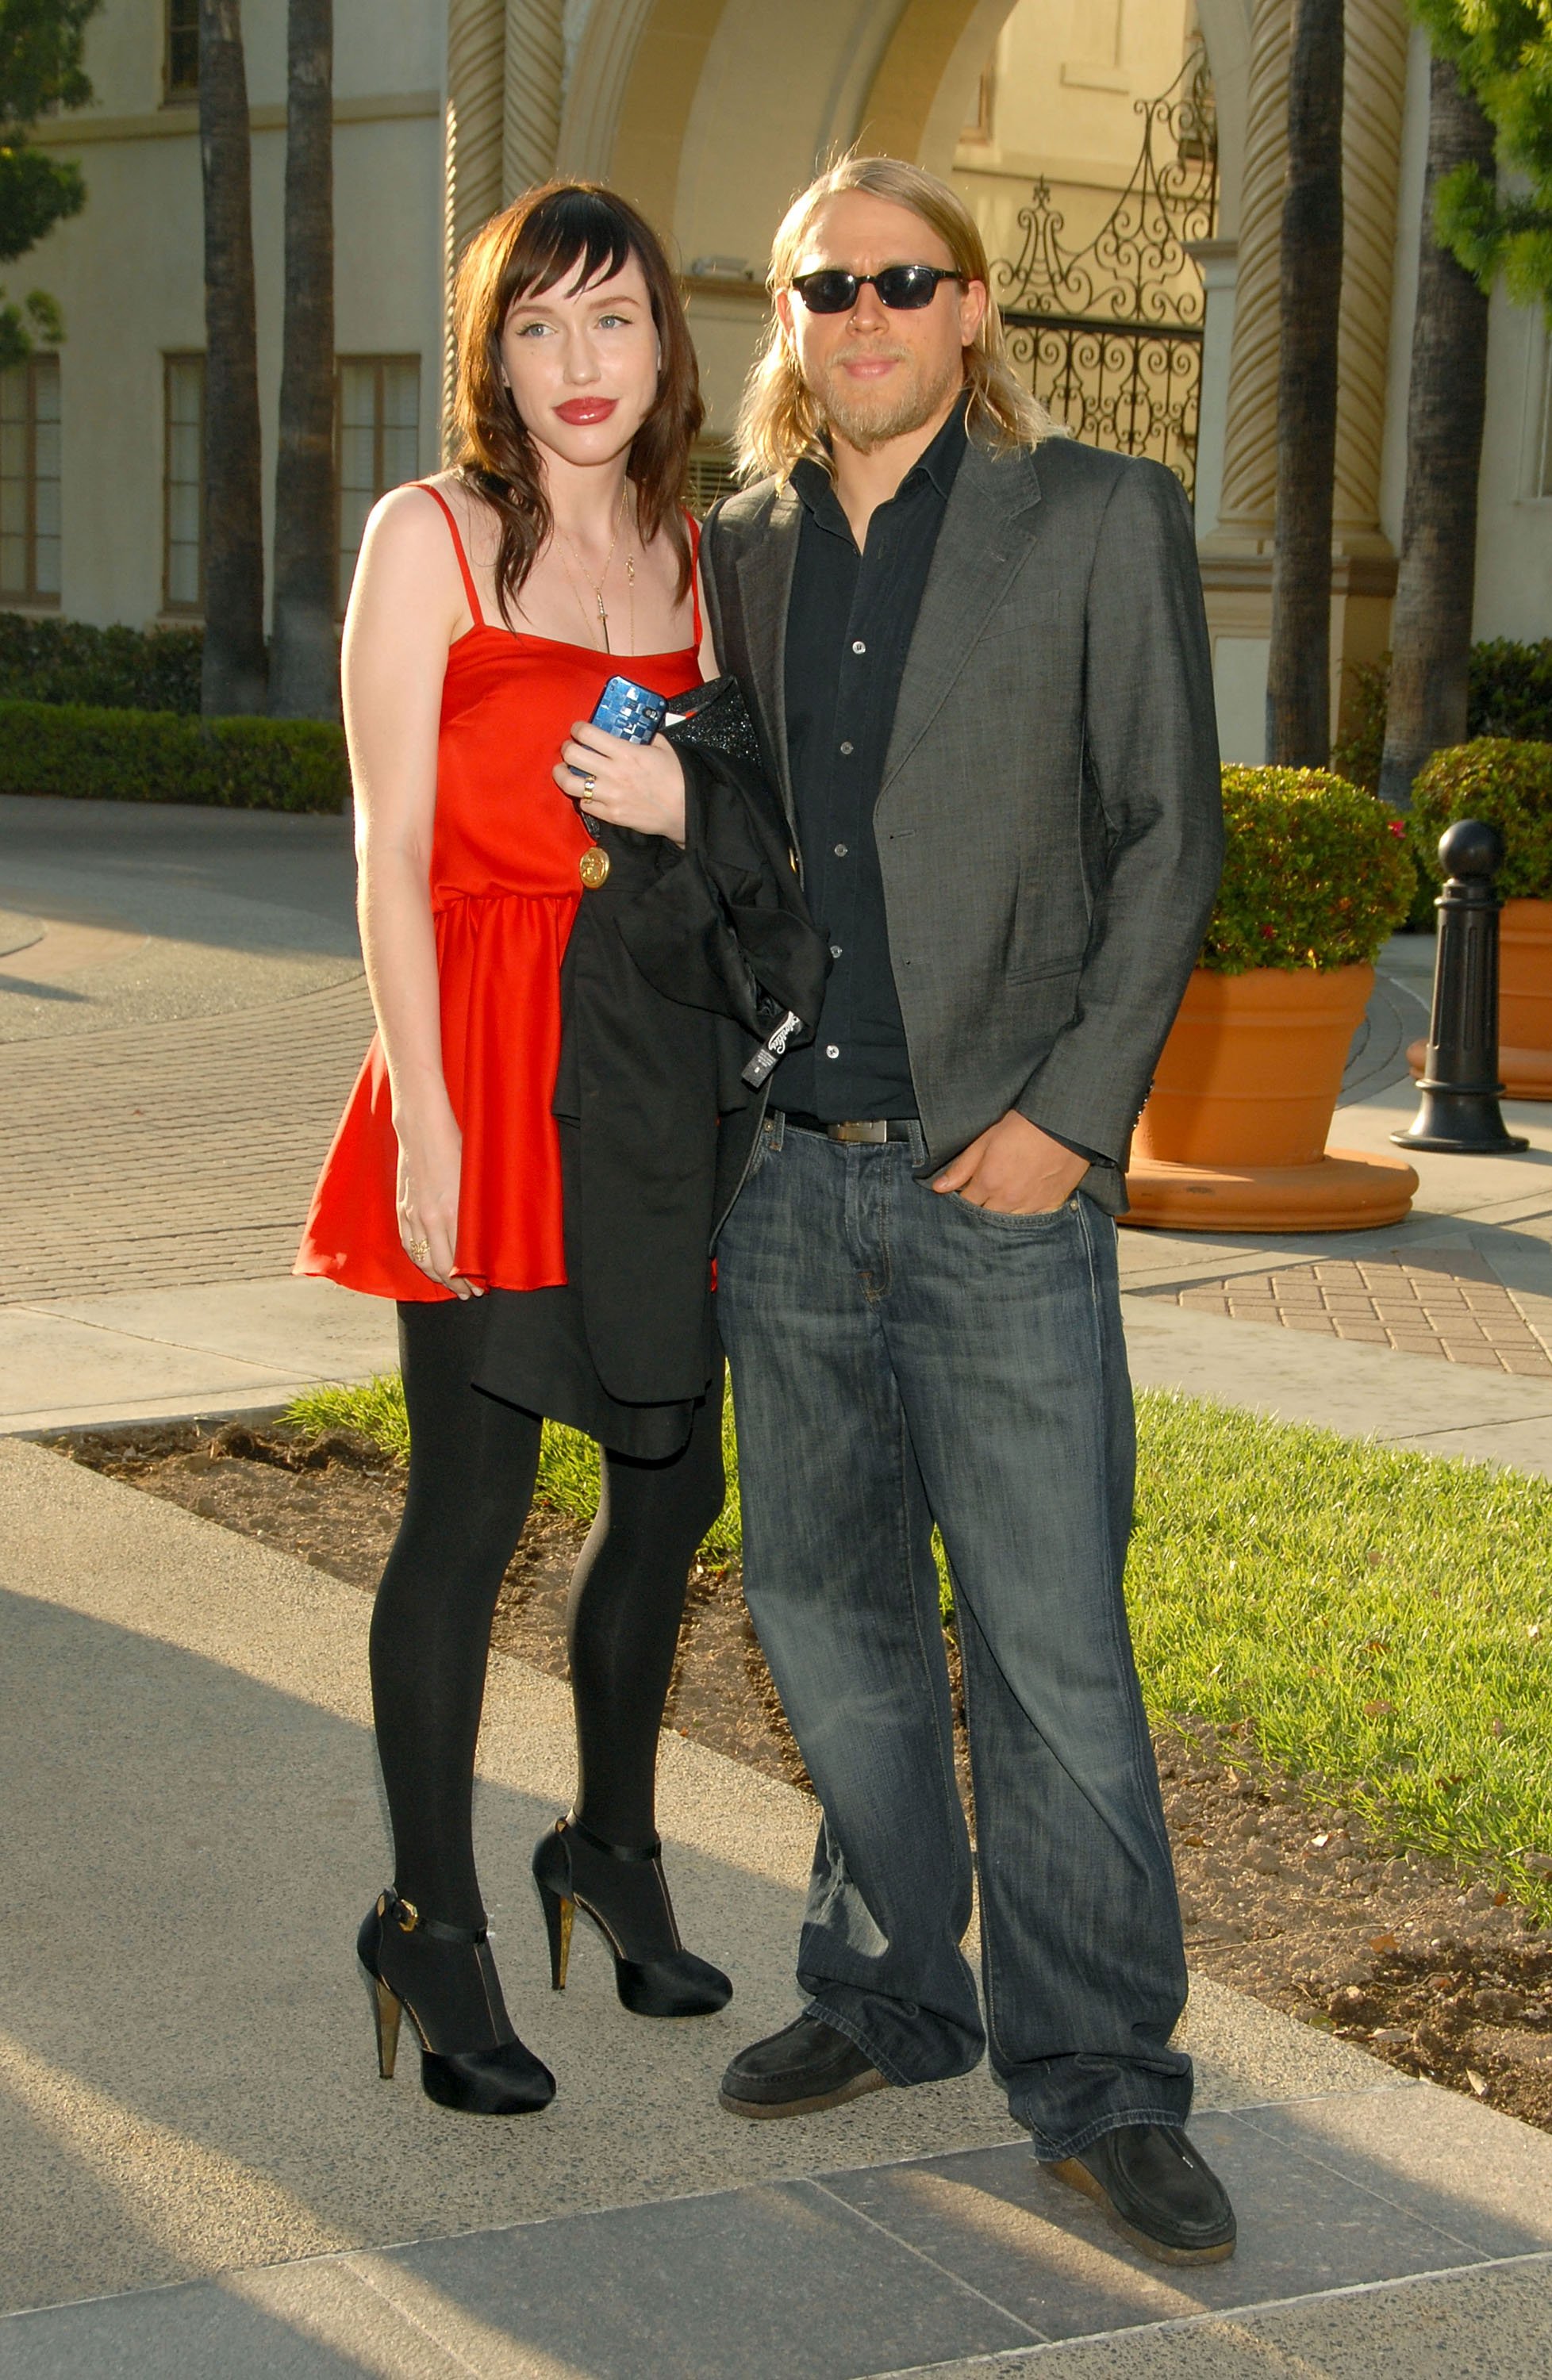 Charlie Hunnam and Morgana McNelis attend the season two premiere screening of "Sons Of Anarchy" on August 23, 2009 in Hollywood, California. | Source: Getty Images